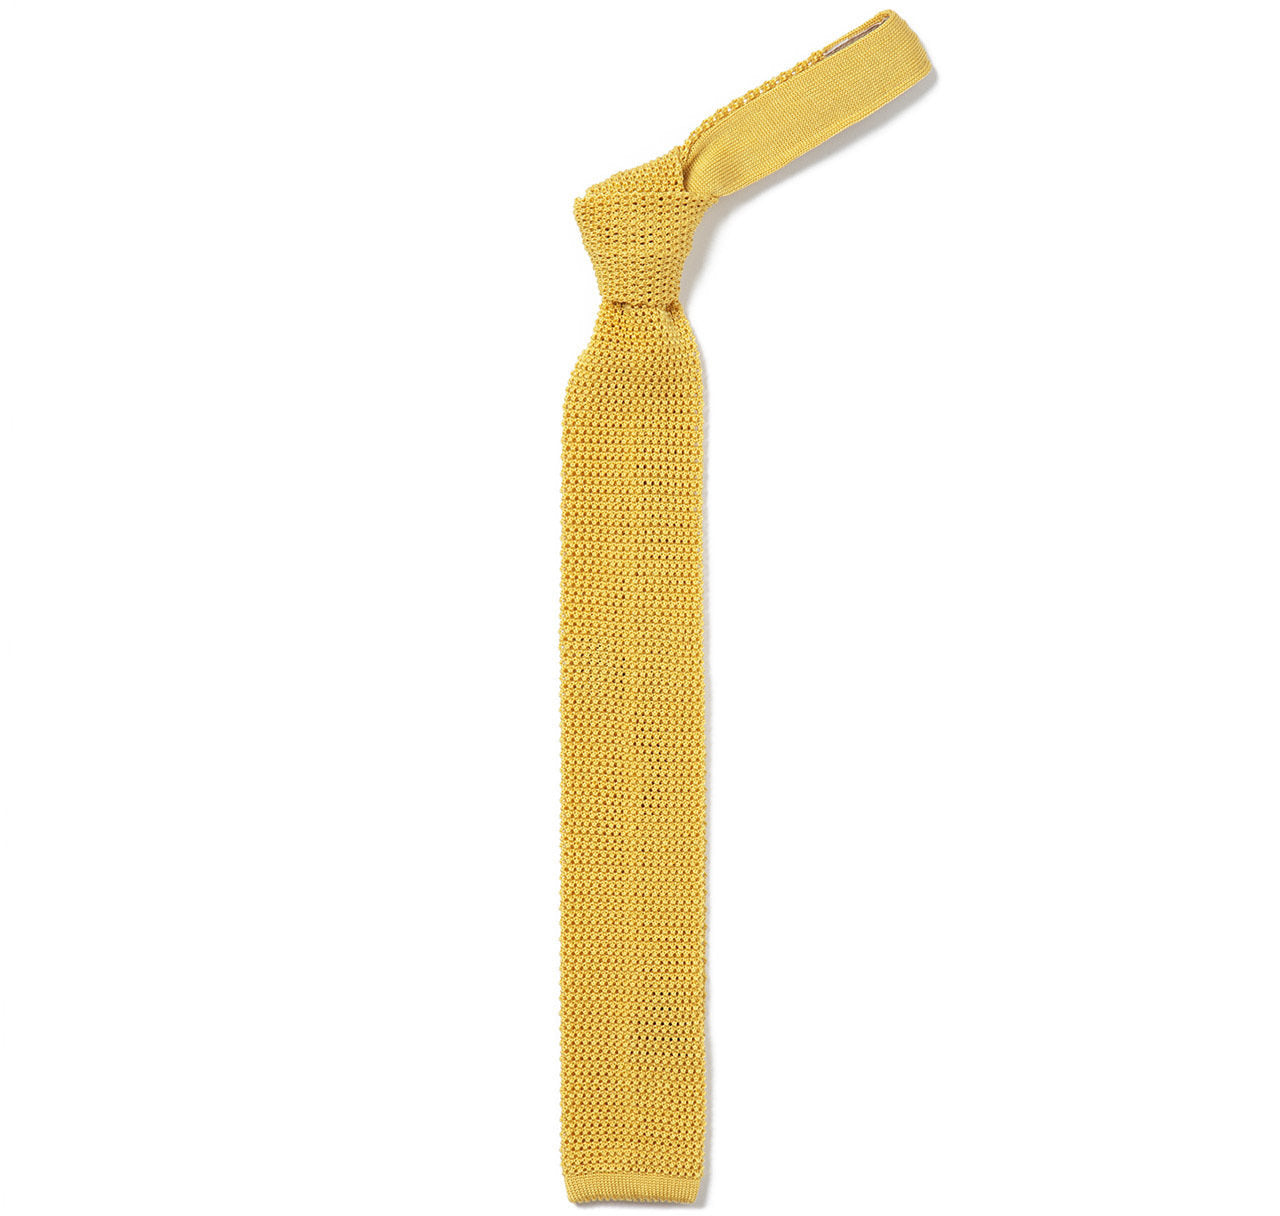 Sir Jack's Classic Knit Silk Tie in Monte Carlo Yellow